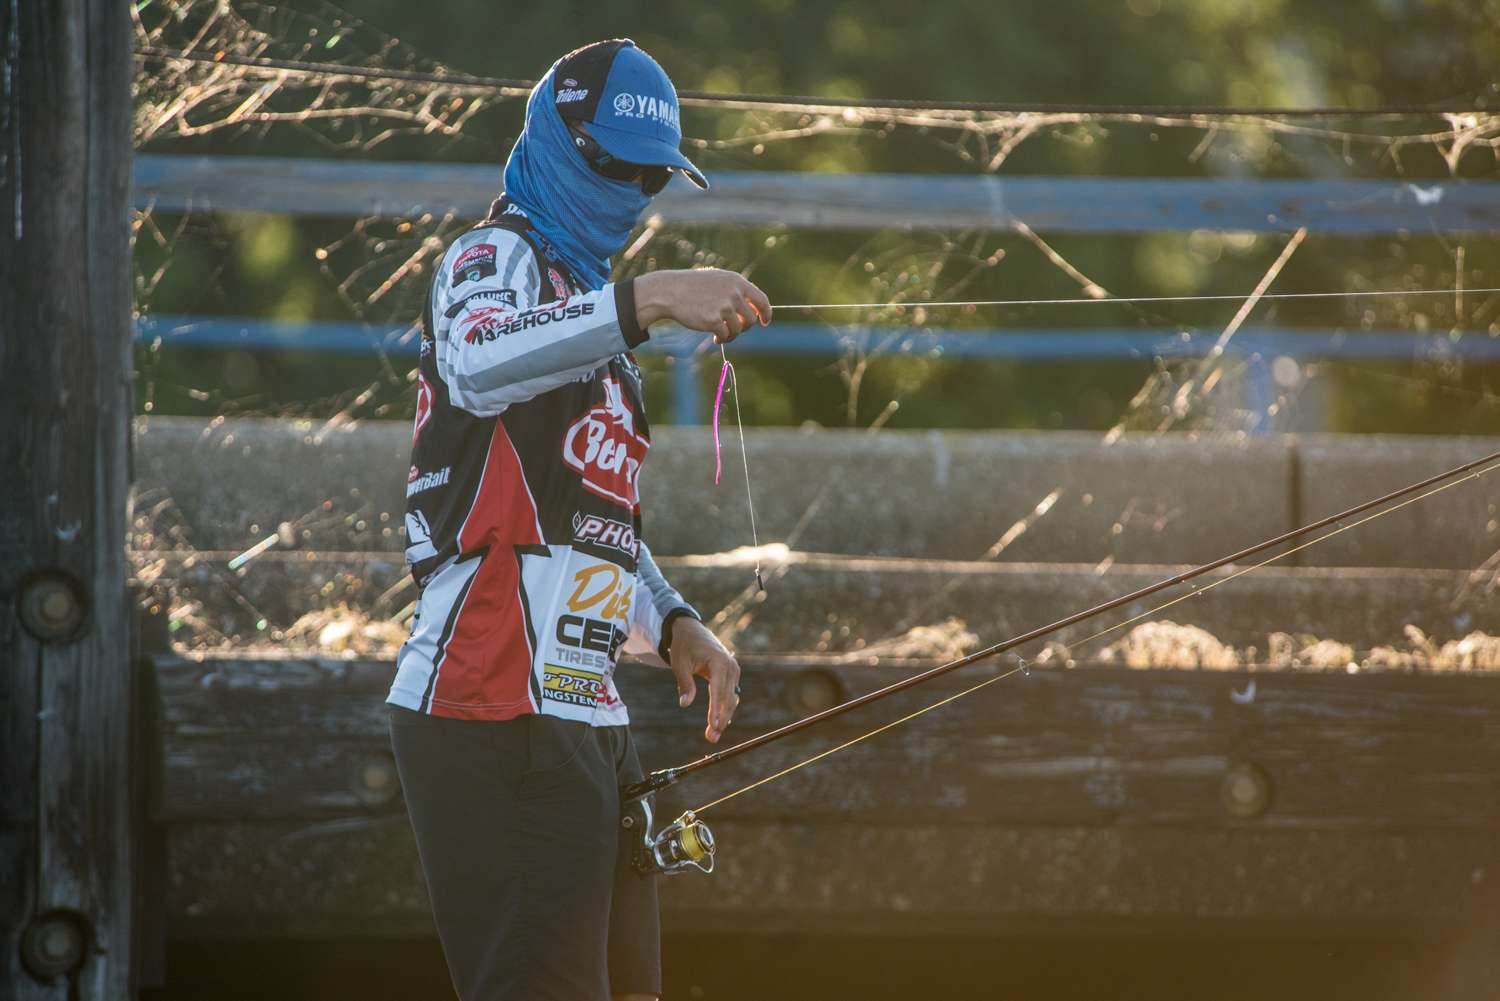 <b>Justin Lucas</b><br> Lucas primarily used a 6-inch hand-poured worm, blue and brown, rigged with a 3/16-ounce Eco Pro Tungsten Weight and 1/0 hook. He fashioned those components into a drop shot rig fished along a pier, where the bass were suspended over 8 feet of water. 